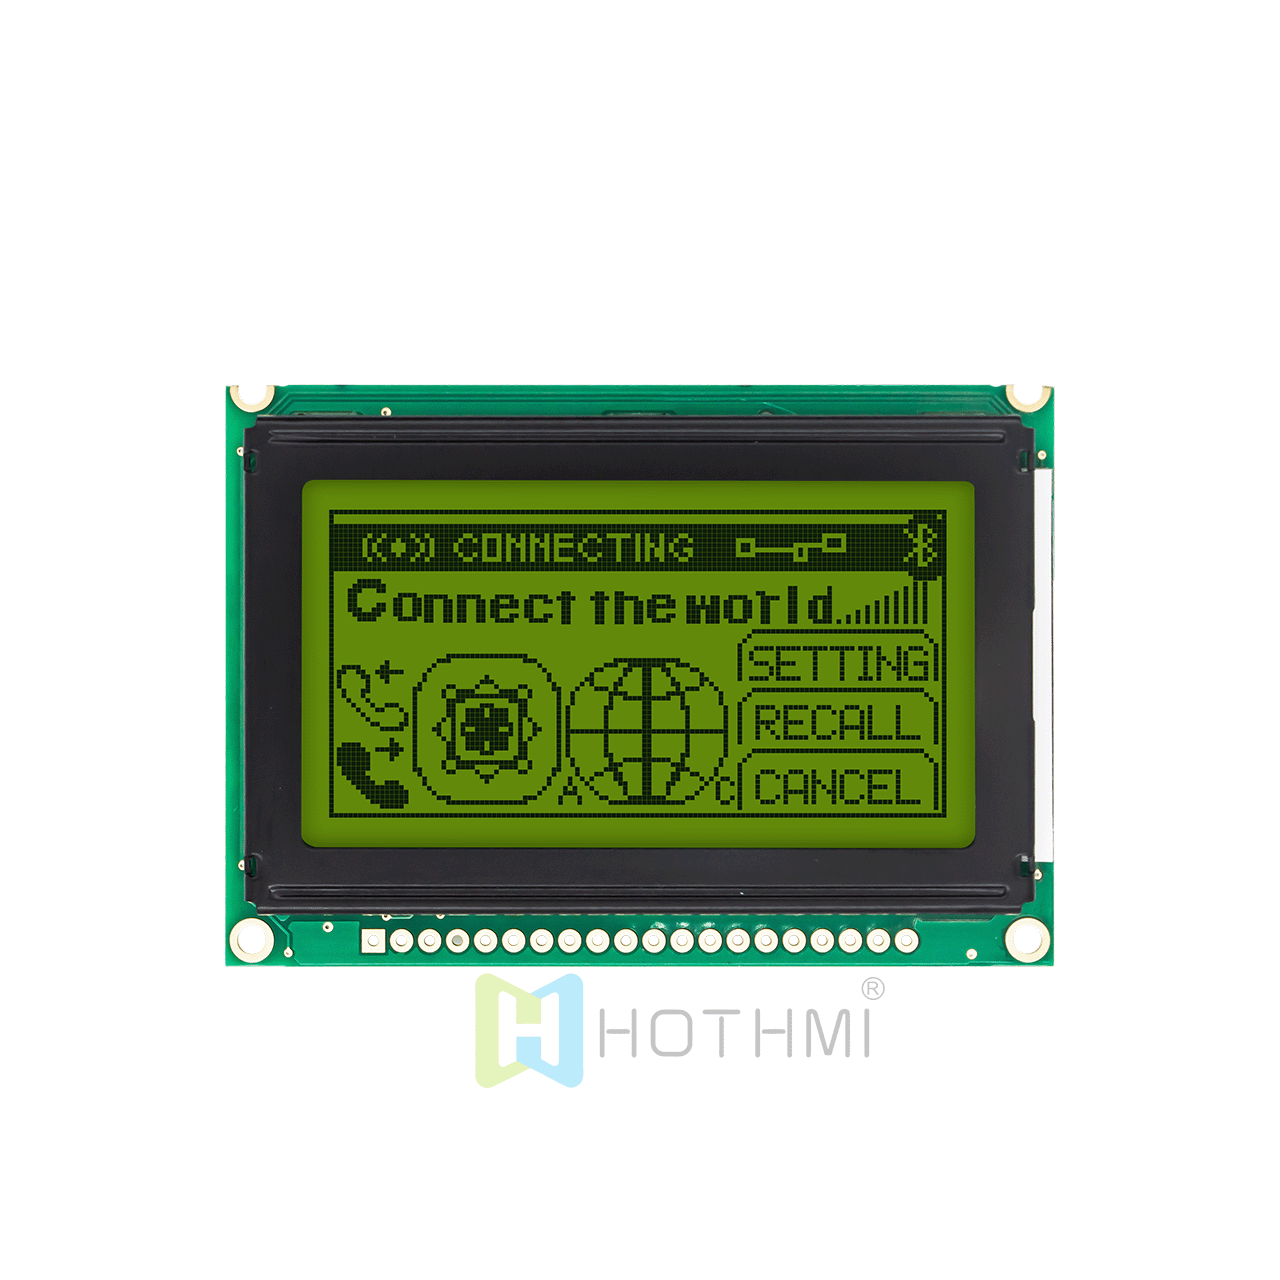 2.7" 128 x 64 Graphic LCD | 12864 Graphic LCD | STN + Yellow-Green Backlight | Transflective Polarizer